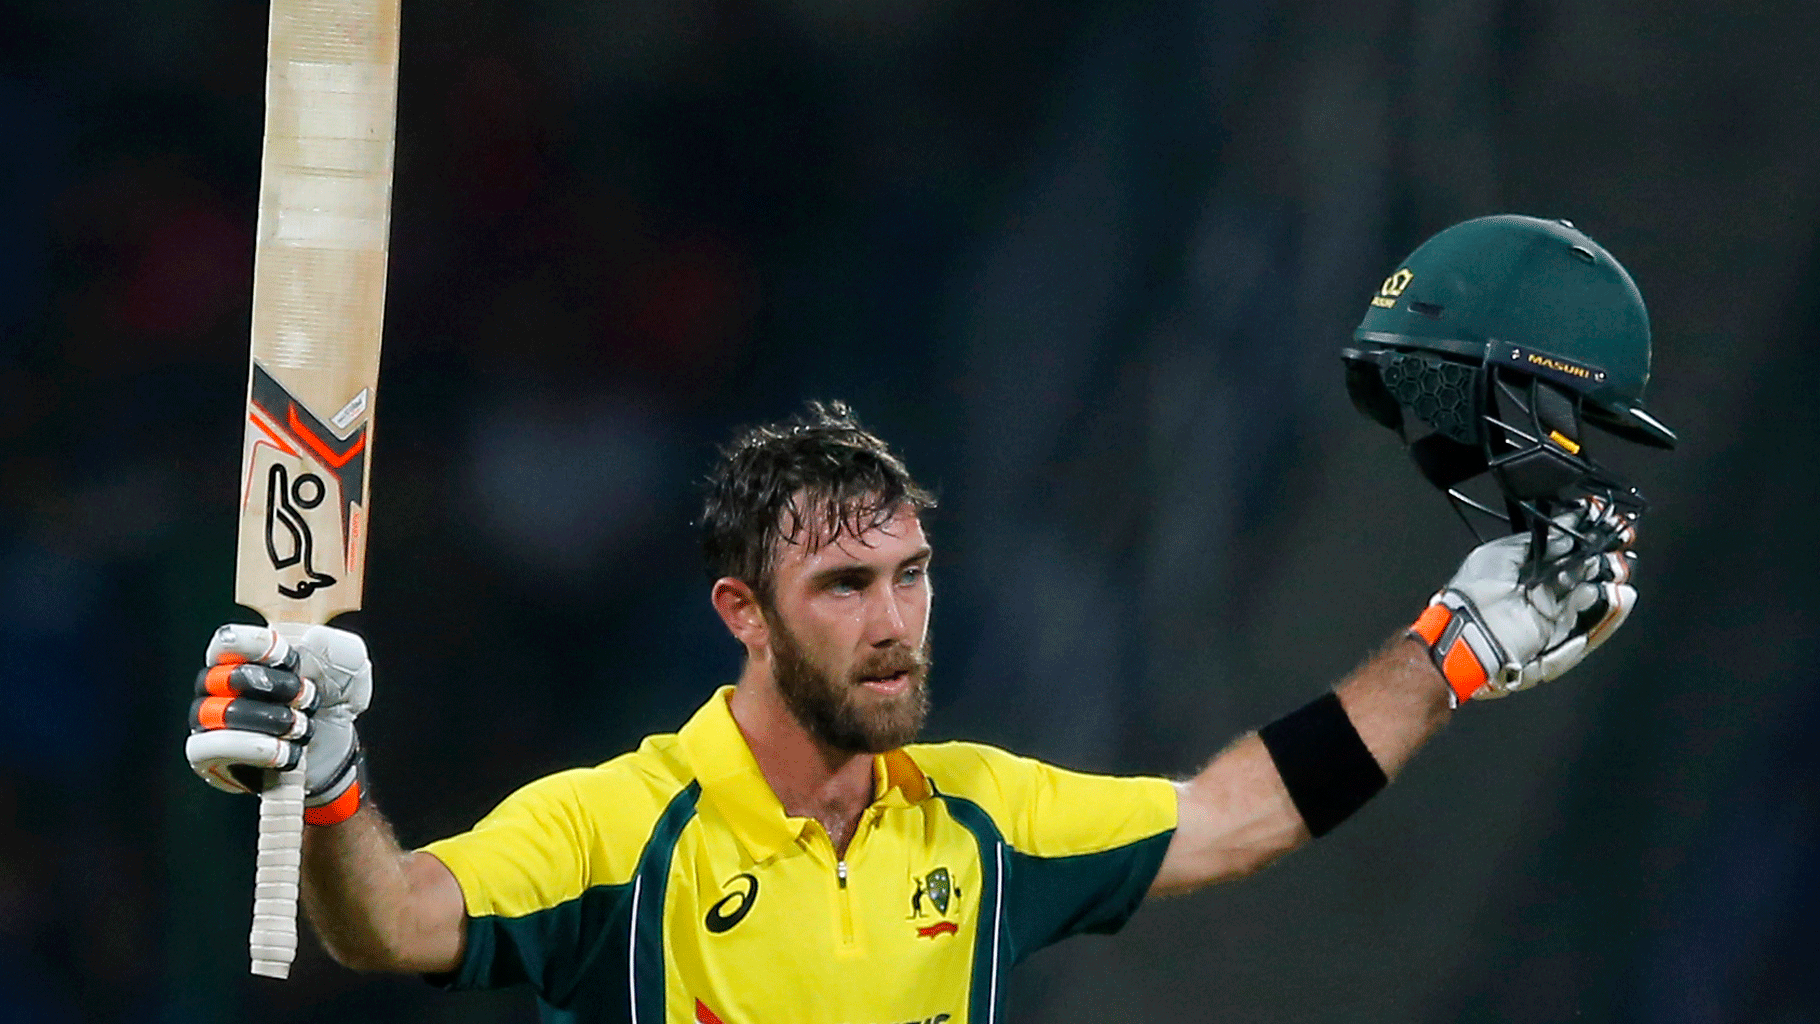 All-rounder Glenn Maxwell will be taking a break from cricket to take care of his mental health.